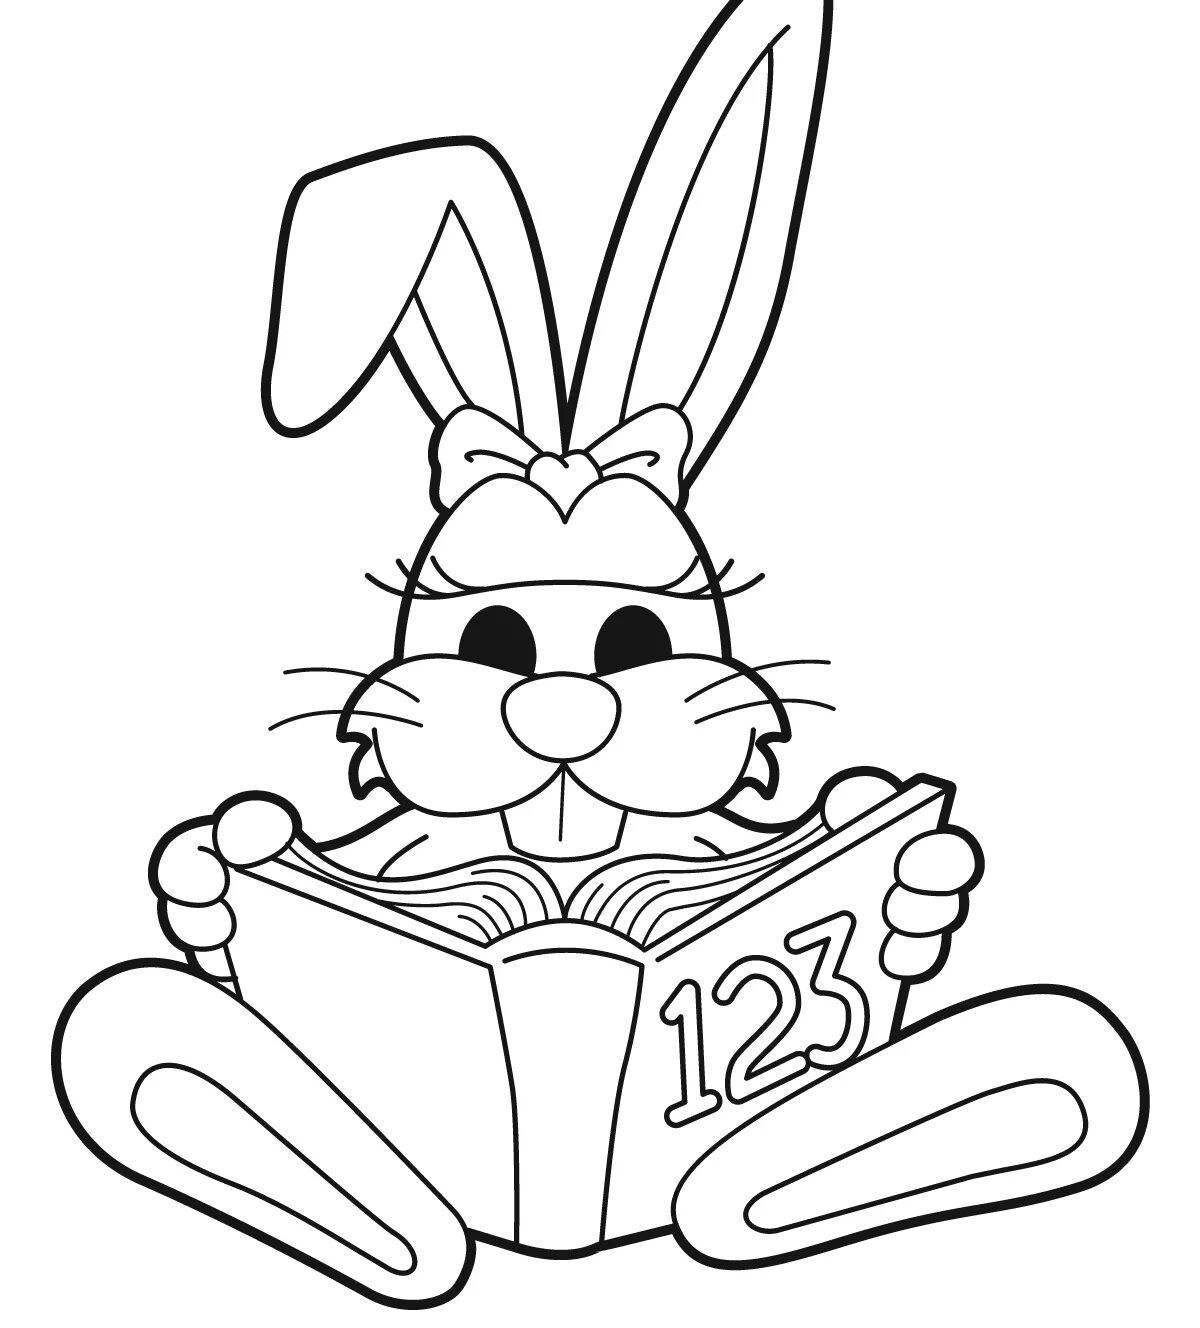 Cute rabbit on the bench coloring book